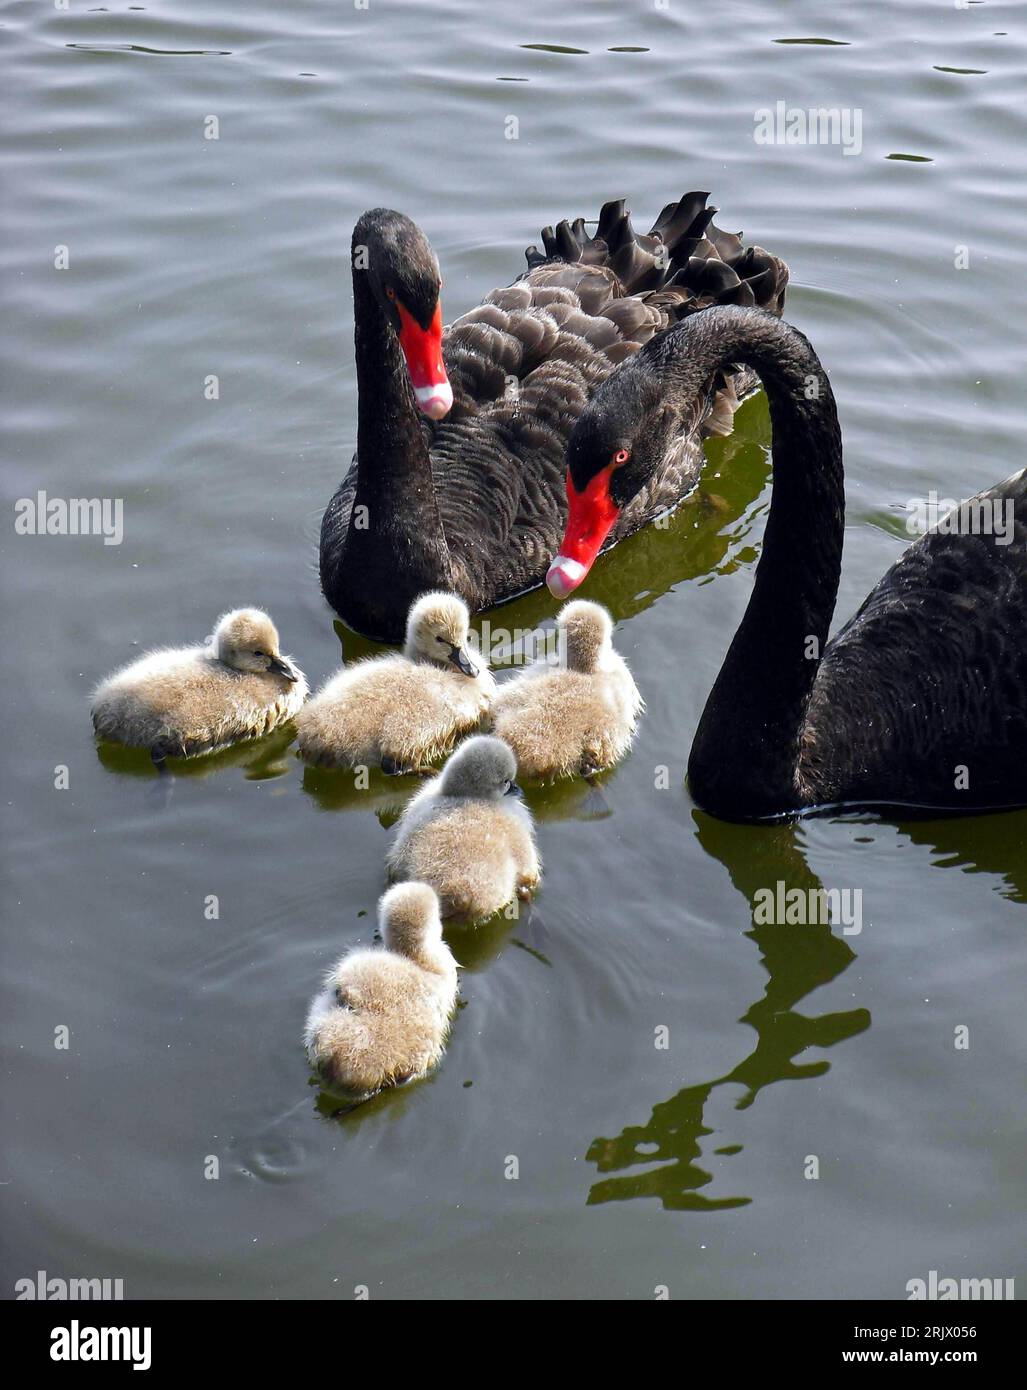 Alamy - hi-res Schwan photography stock see images auf and